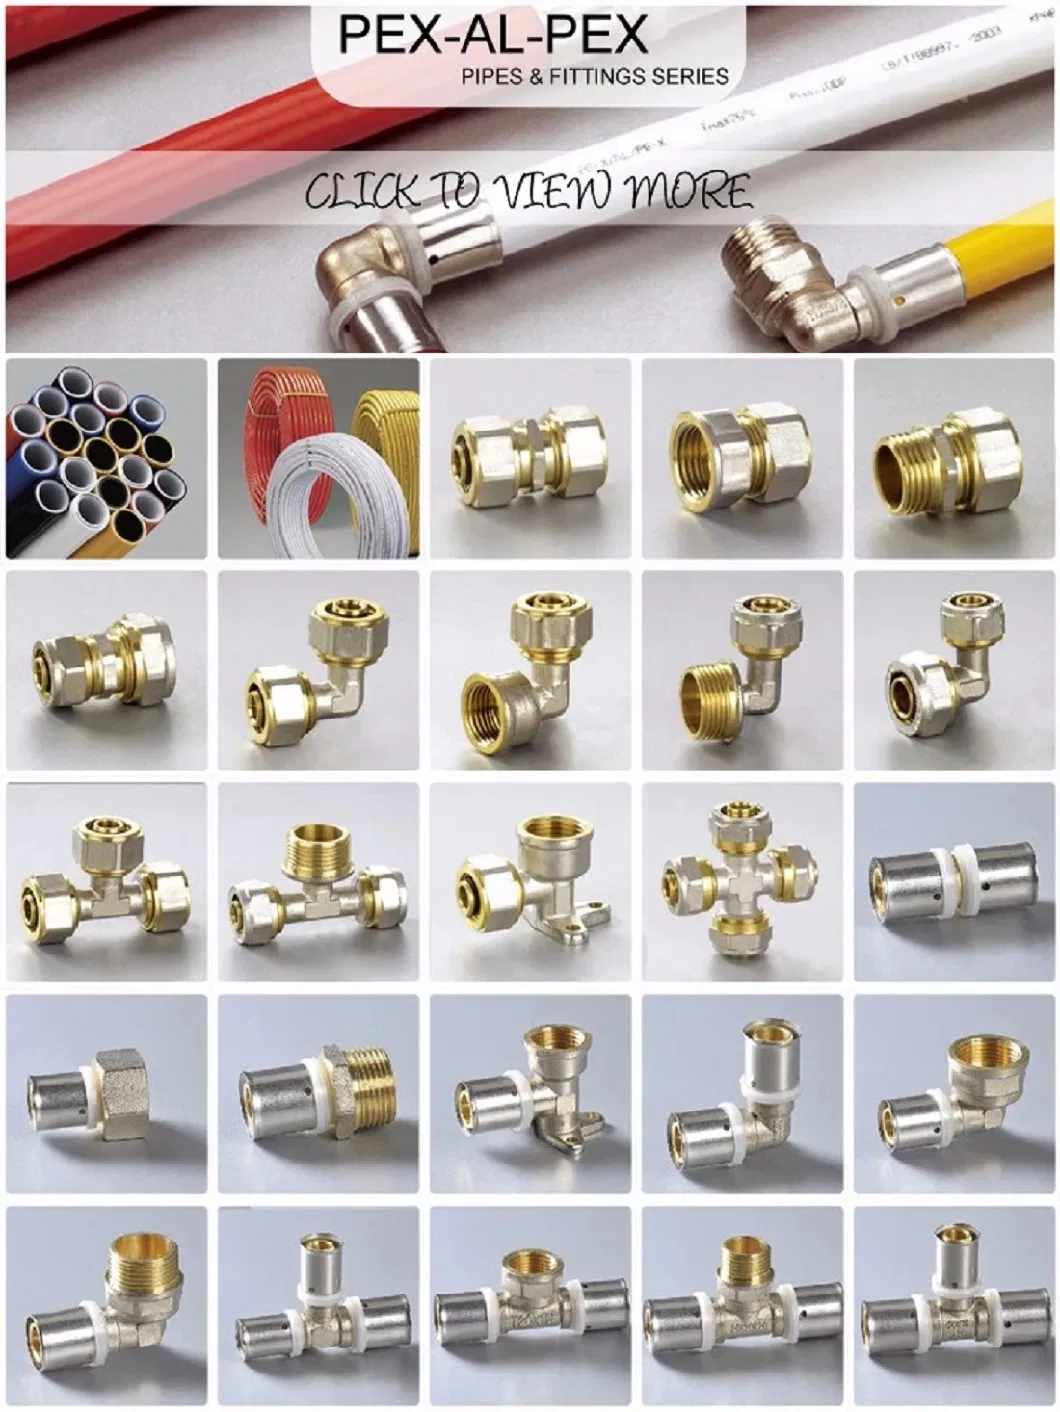 1/2 Inch Pushfit Straight Coupling, Pex Brass Push-Fit Coupling with Disconnect Clip, Push-to-Connect Plumbing Fittings for Pex, Copper, CPVC